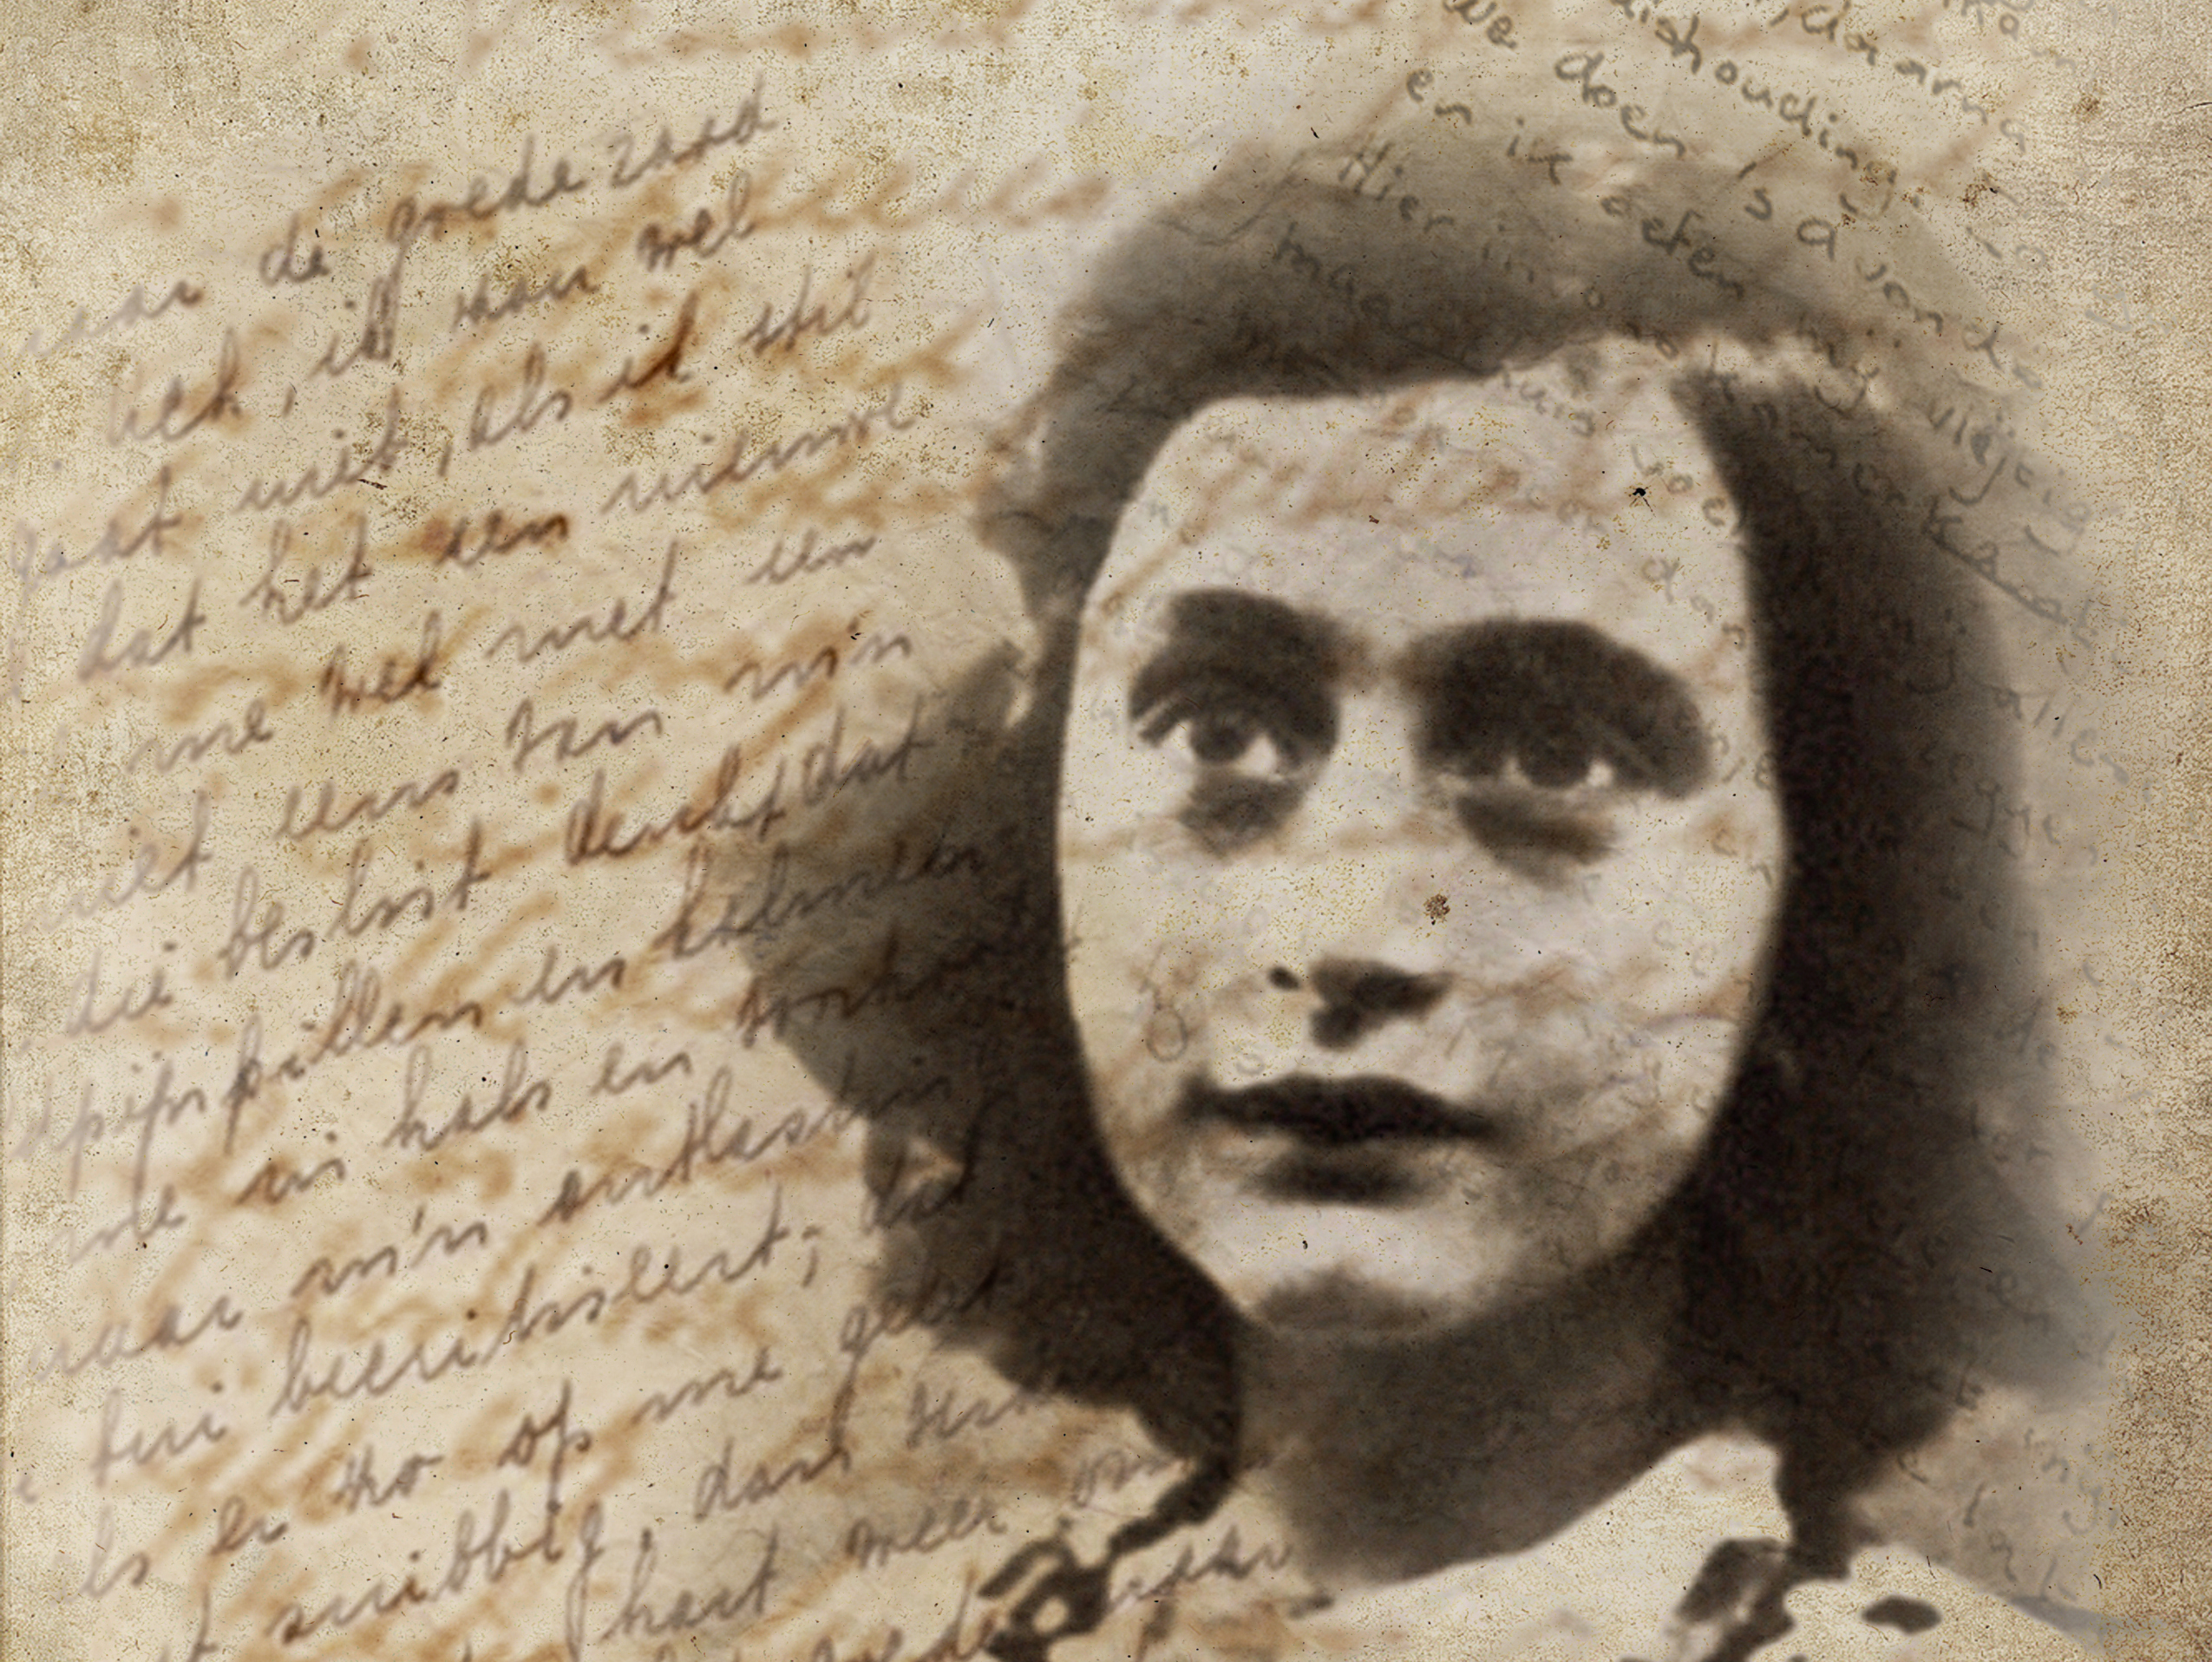 “The Diary of Anne Frank” at Westfield Playhouse will be based on a screenplay adapted by Wendy Kesselman. (Submitted photo)